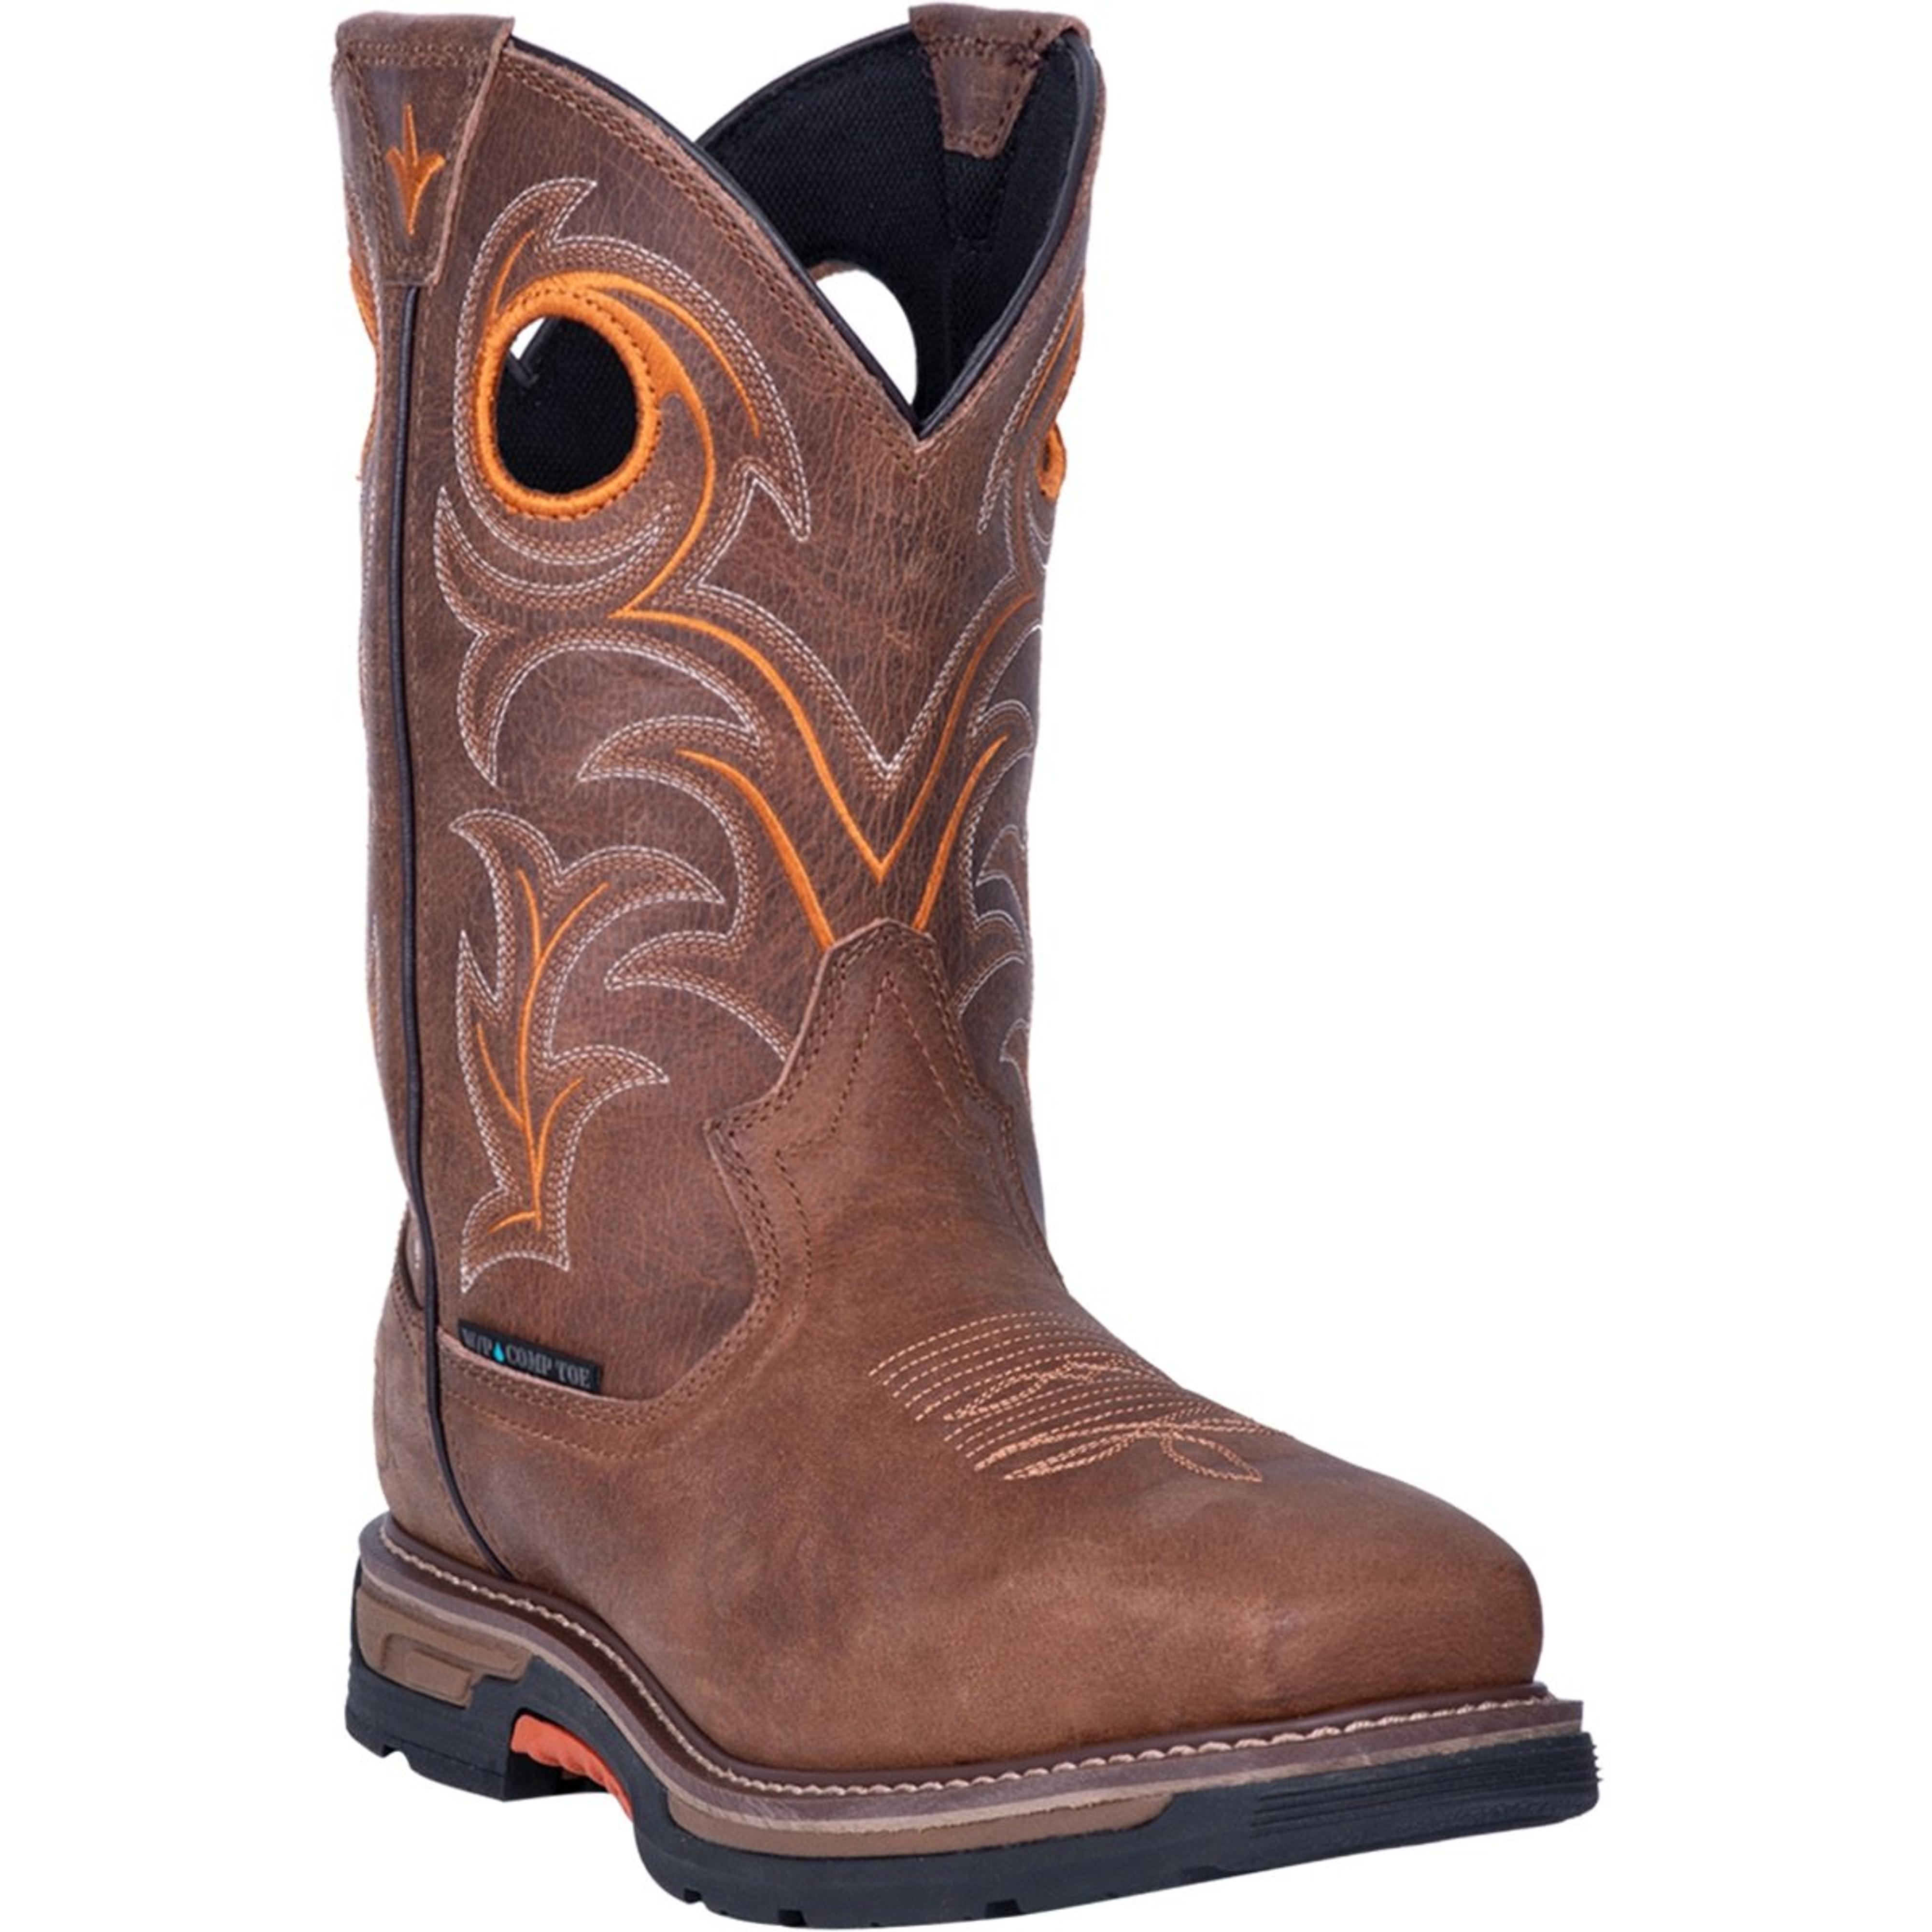  Storms Eye Work Boot